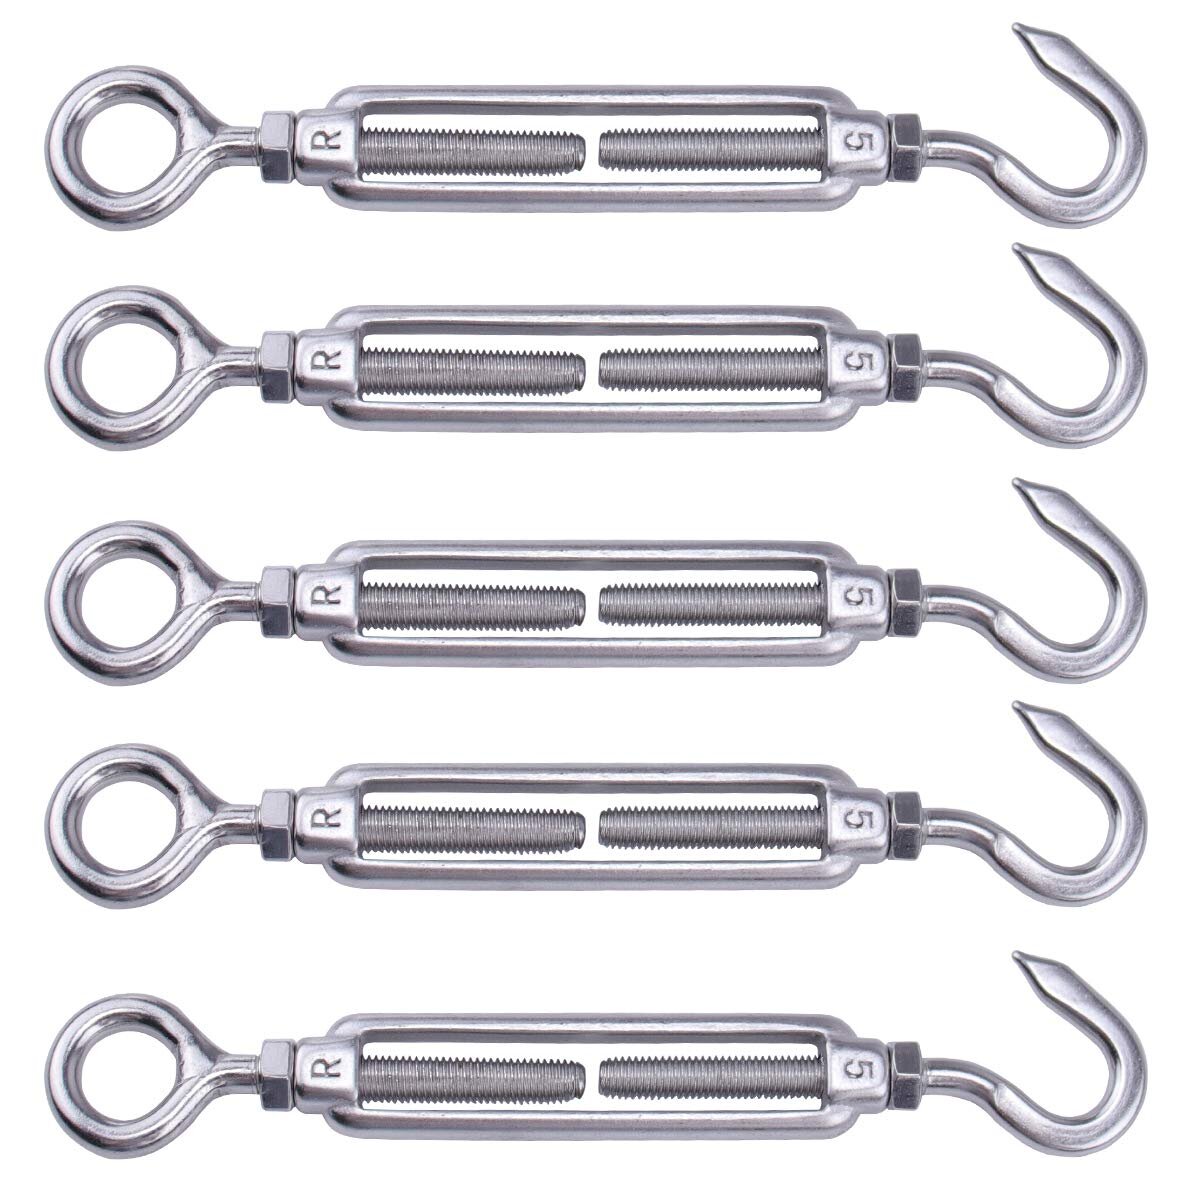 SET 5m wire rope stainless steel strand:7x19 3mm 2 turnbuckles eye-hook M4 many sizes avaliable many sizes avaliable 6 clips